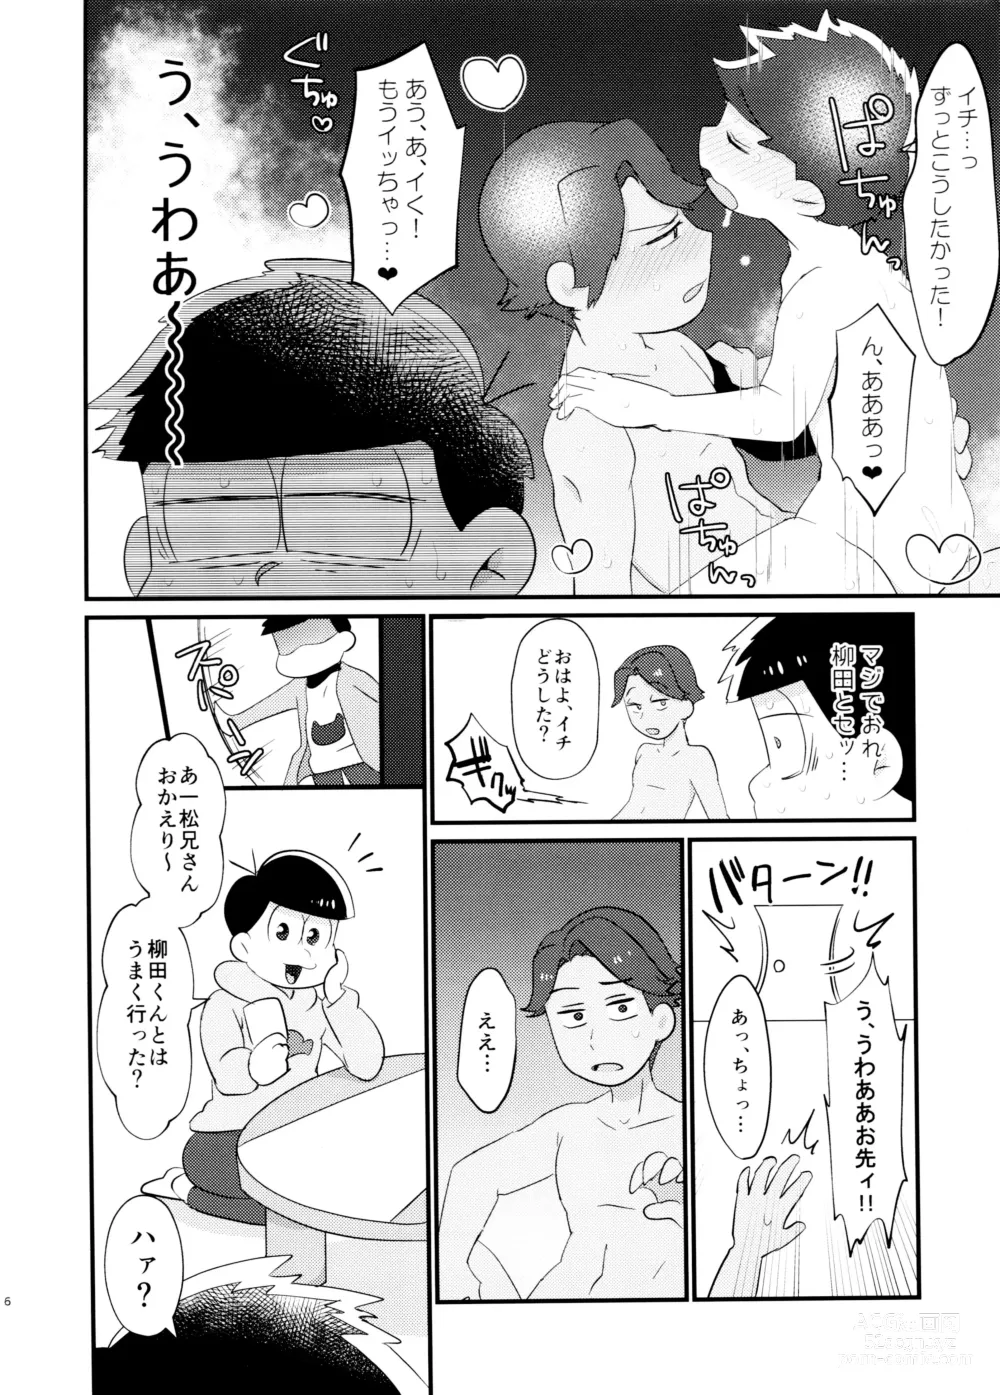 Page 6 of doujinshi My best sex friend